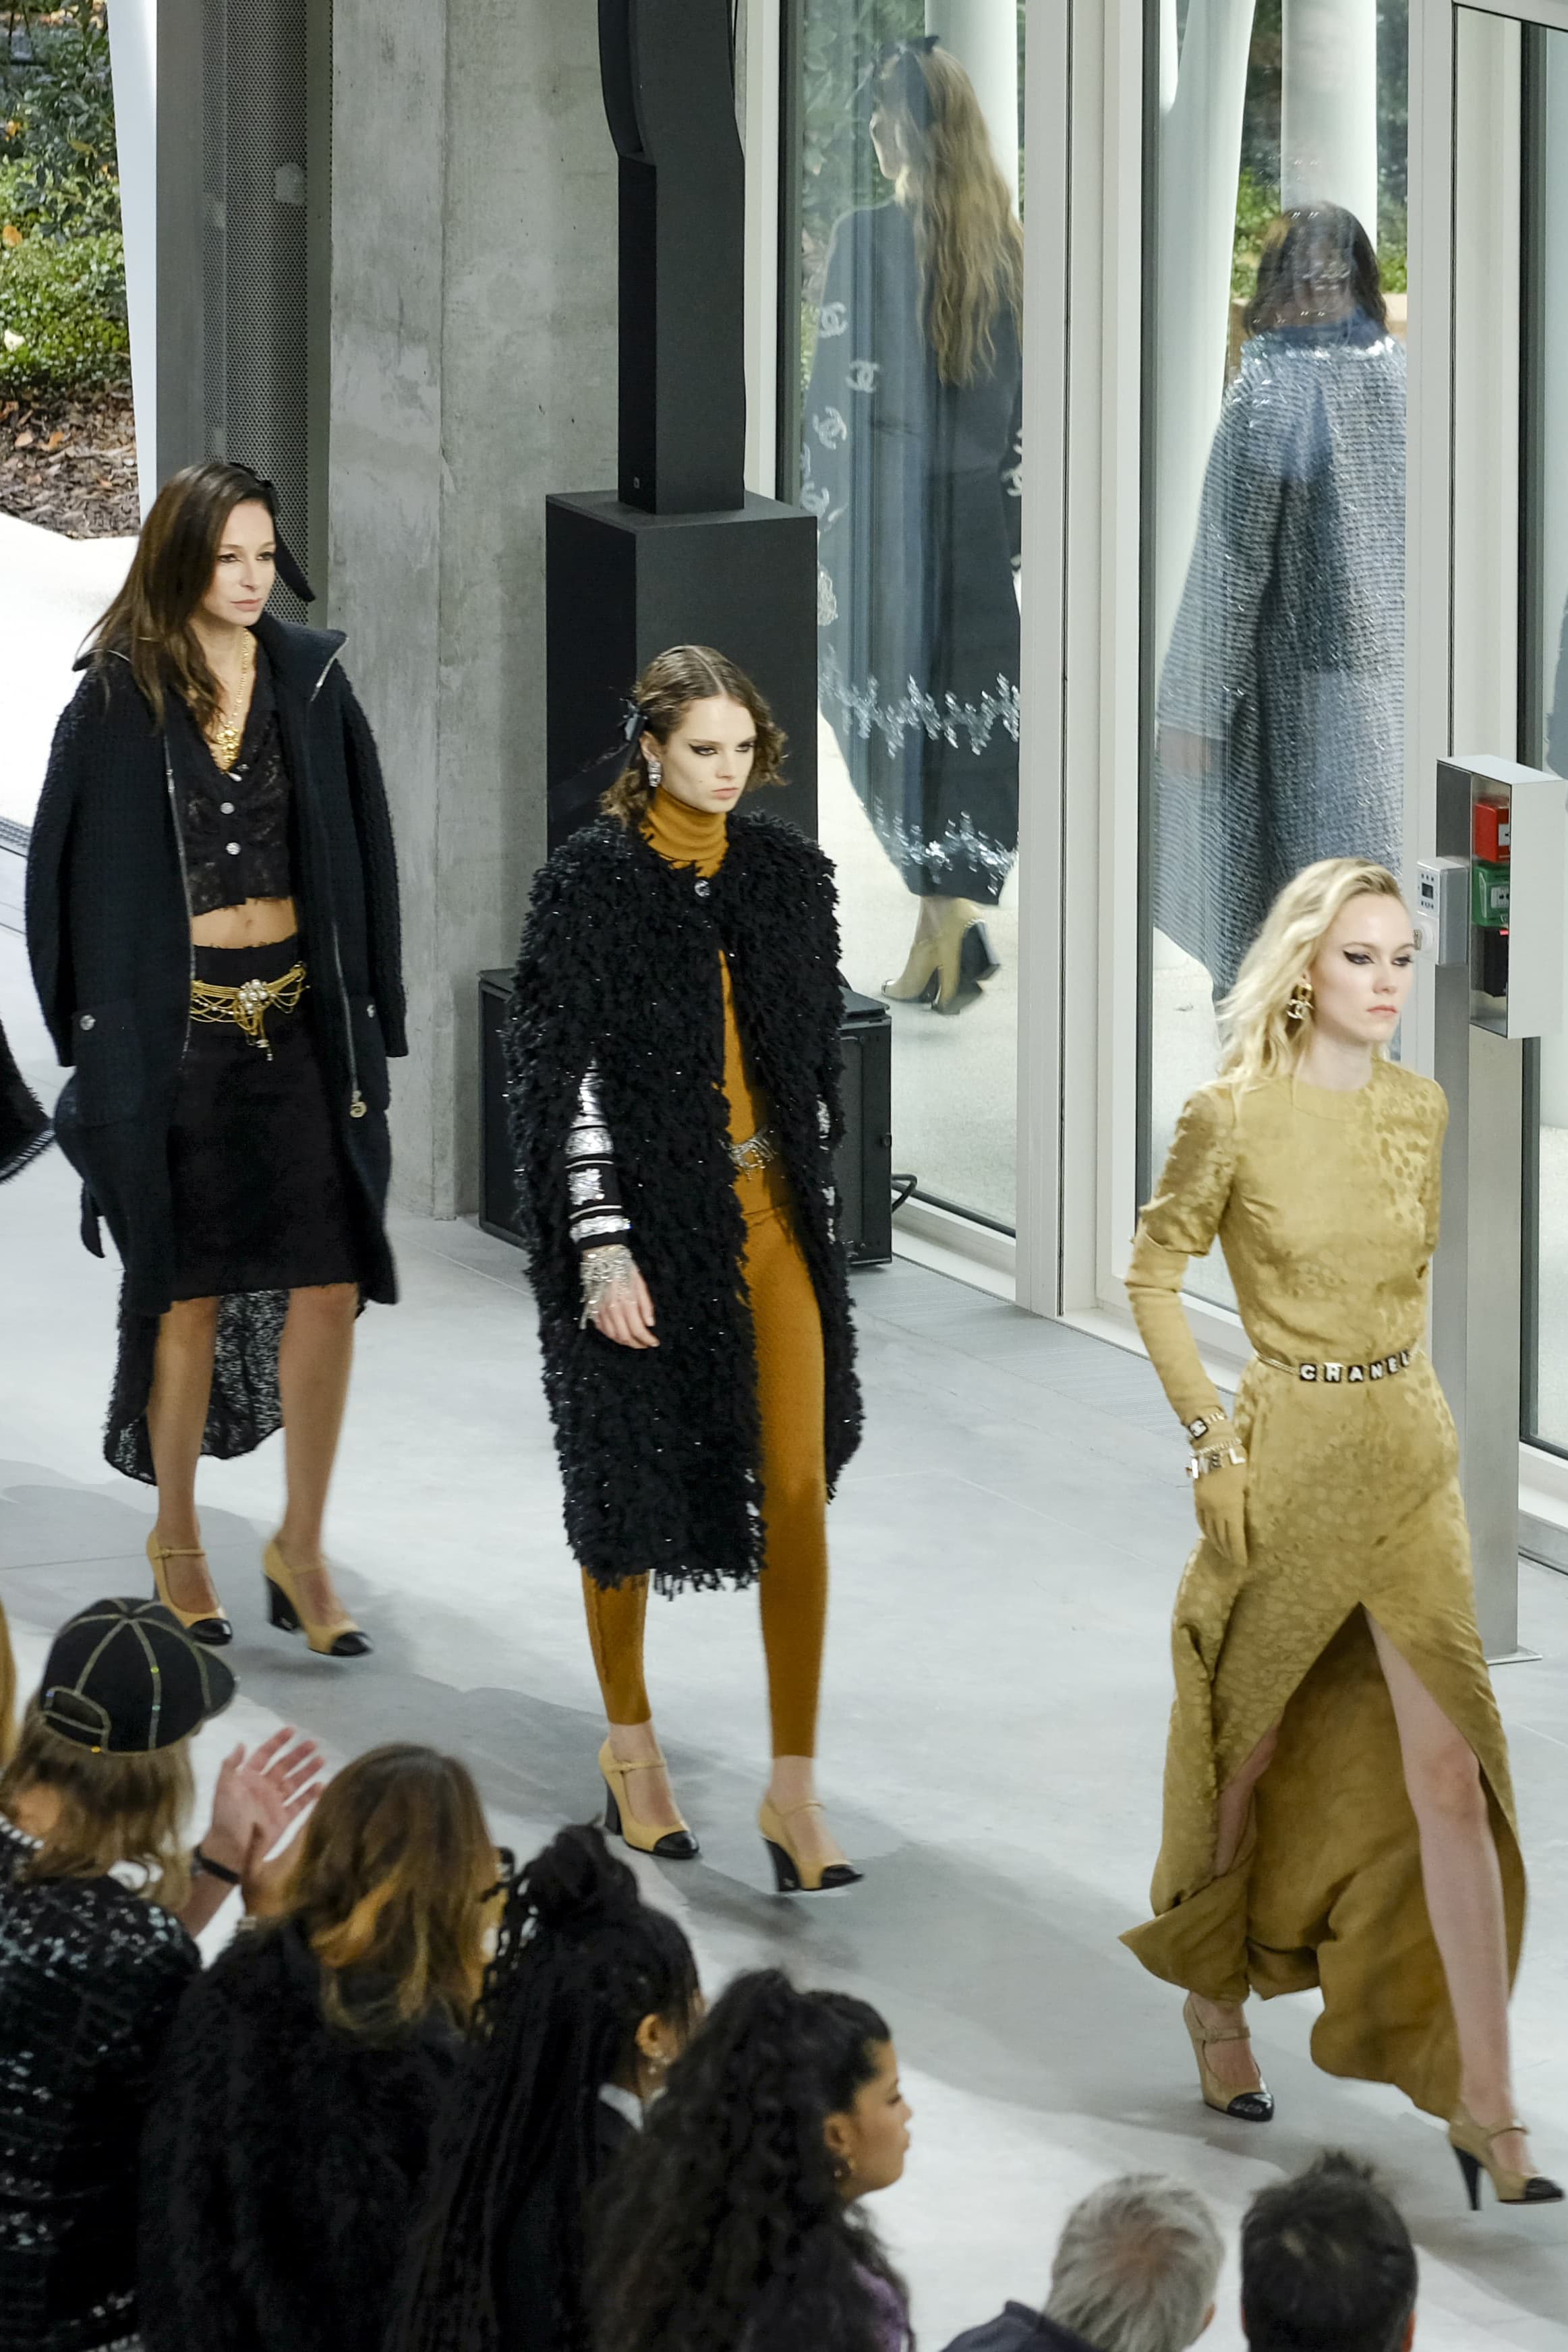 CHANEL PRE-FALL 2022 COLLECTION, Chanel Métiers D'art Fashion Show 2022